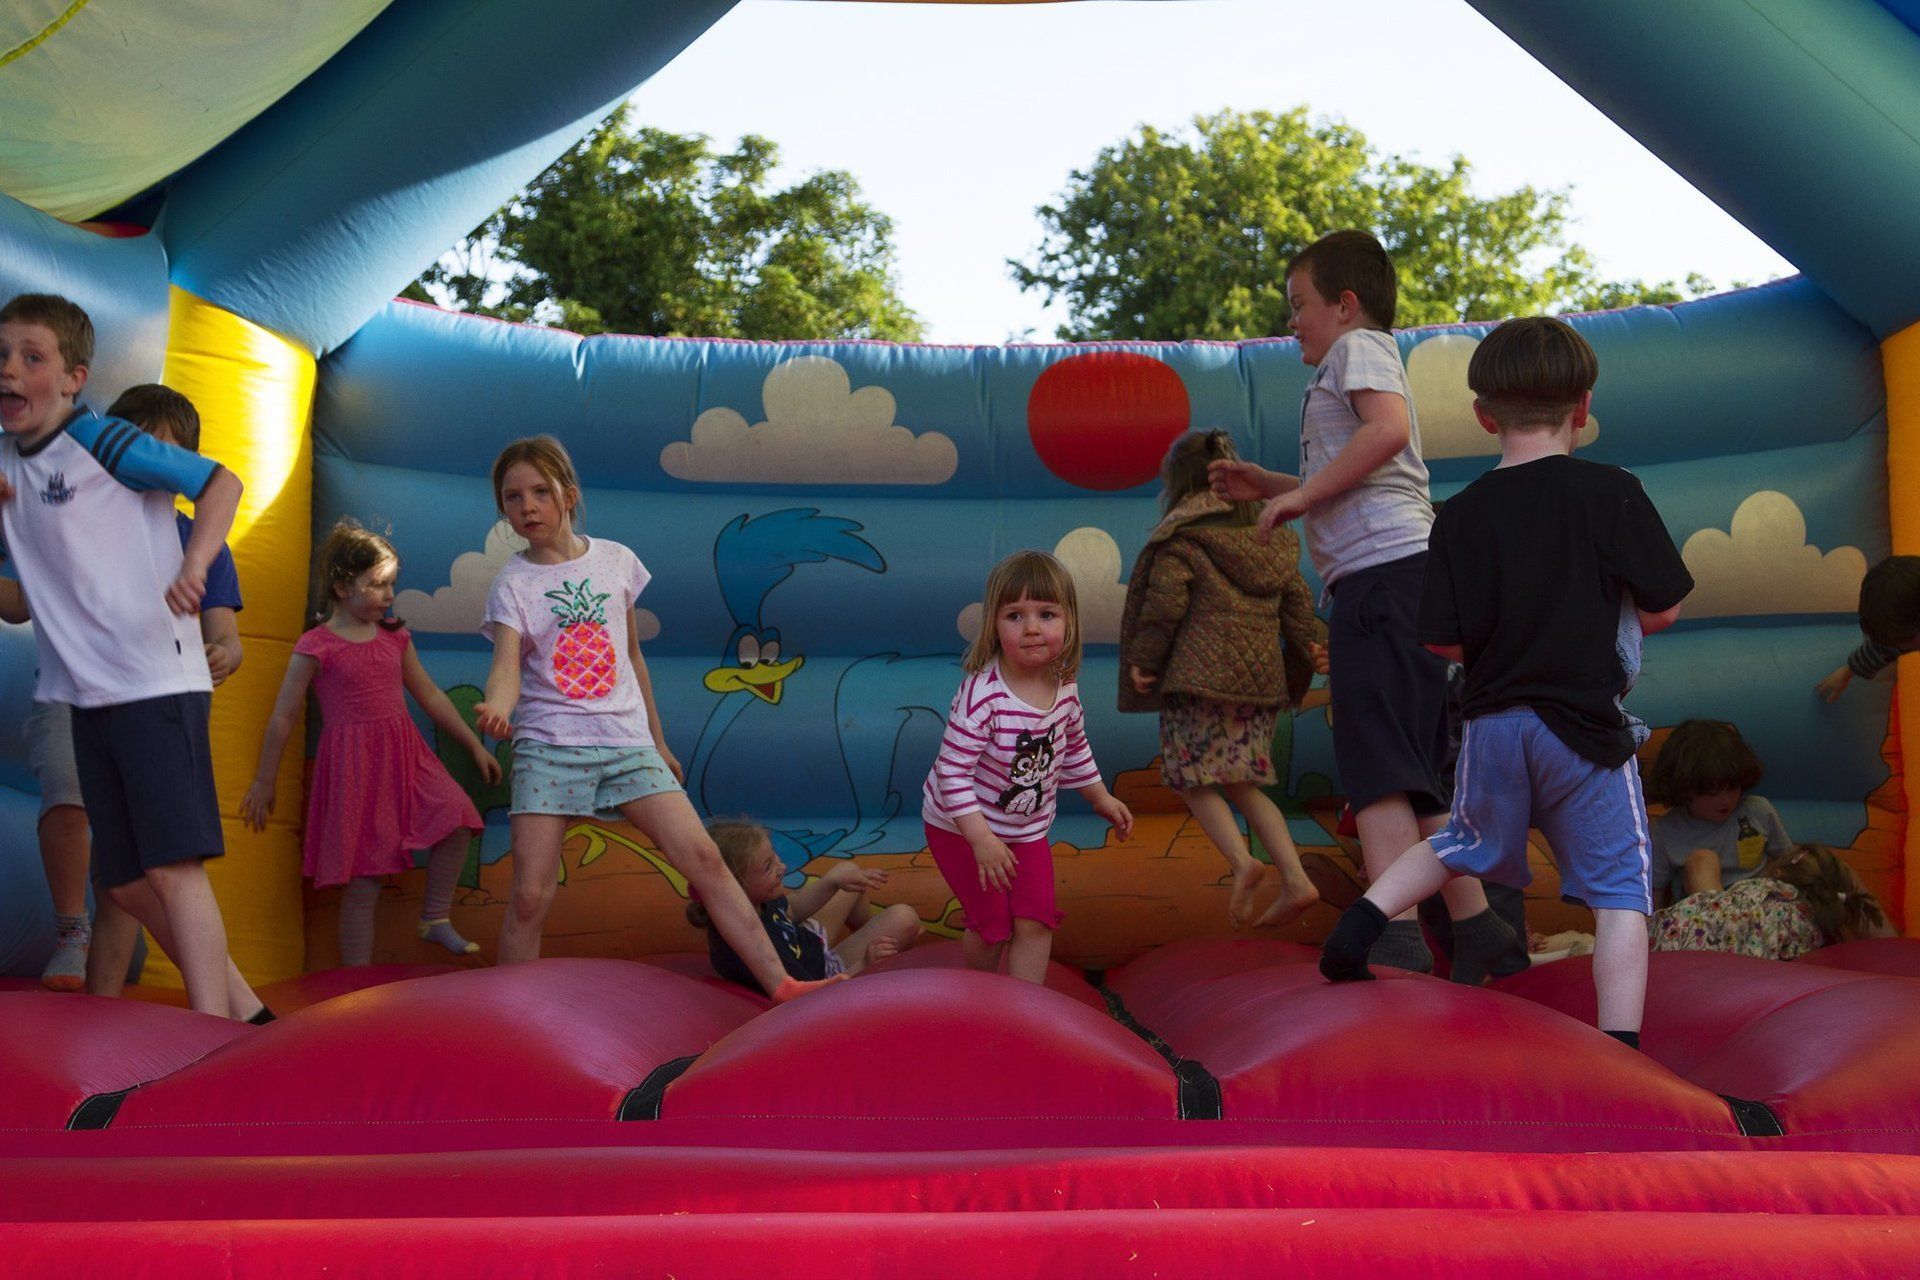 A group of children are playing in a bouncy house.